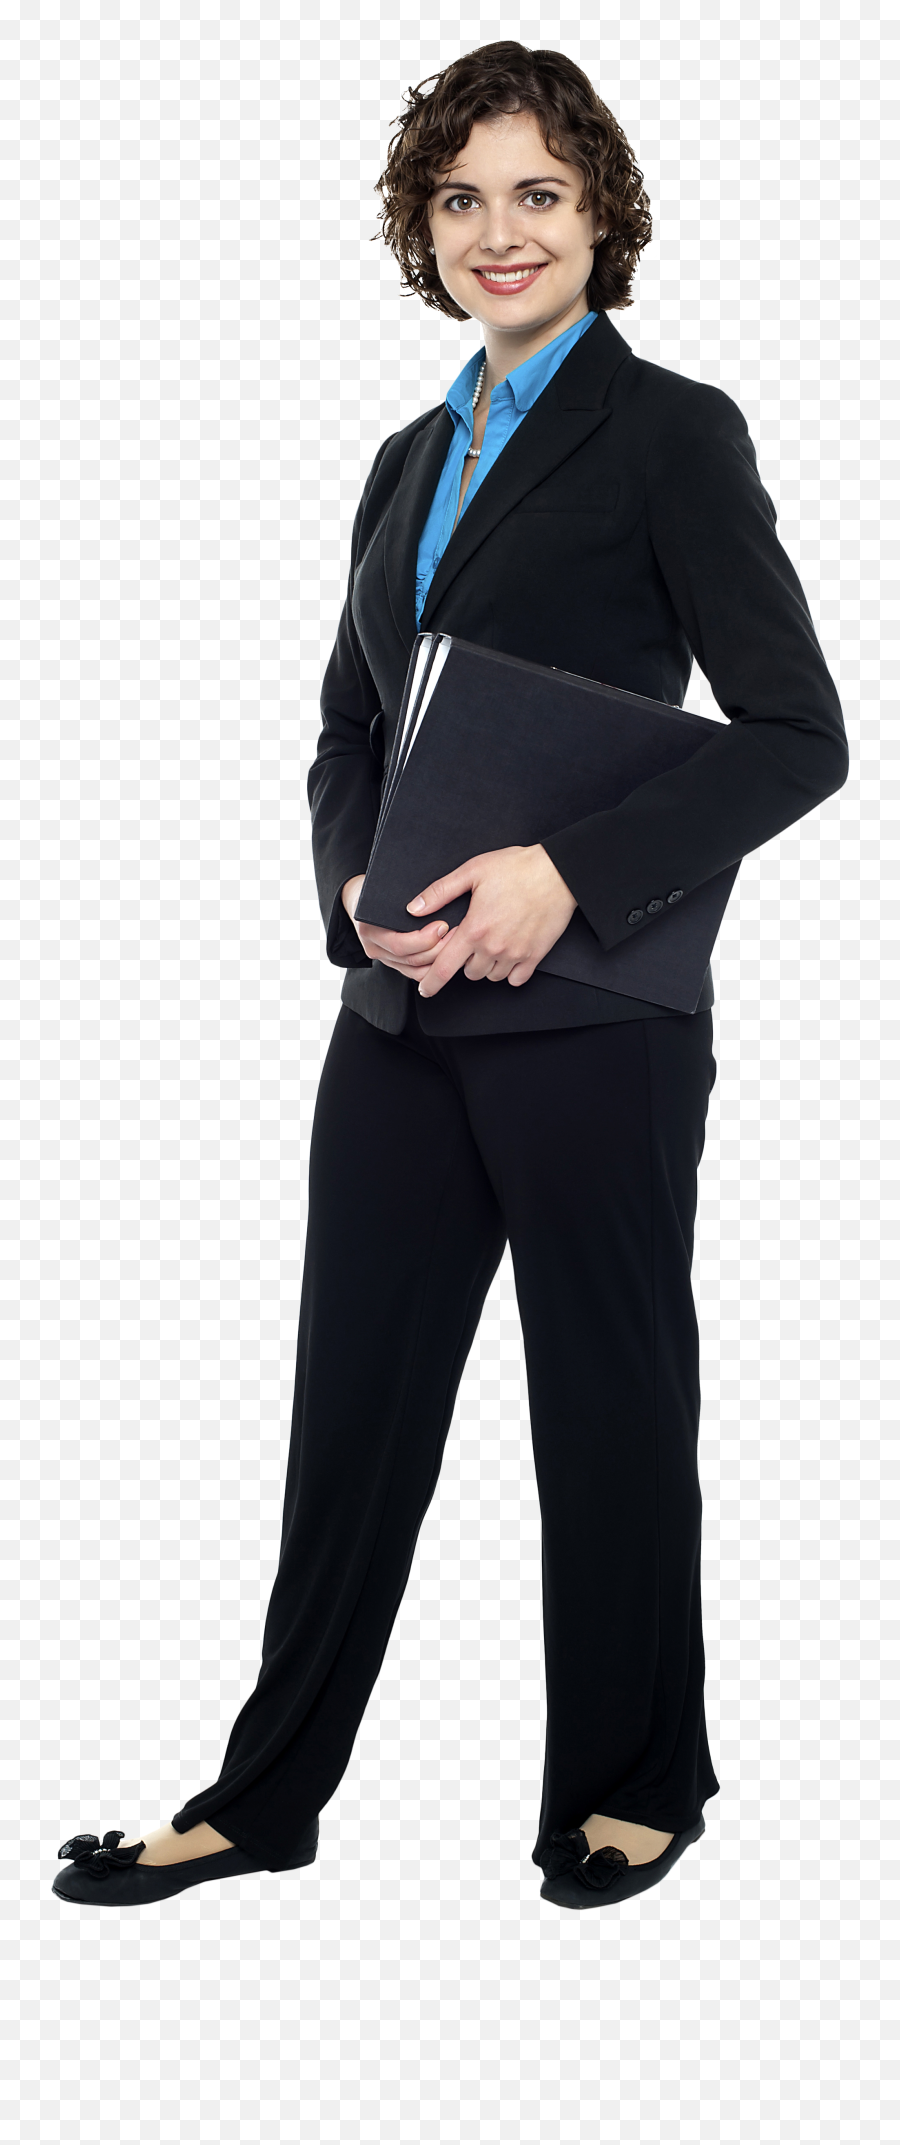 Download Business Women Png Image For Free - Transparent Business Woman Png,Business Woman Png